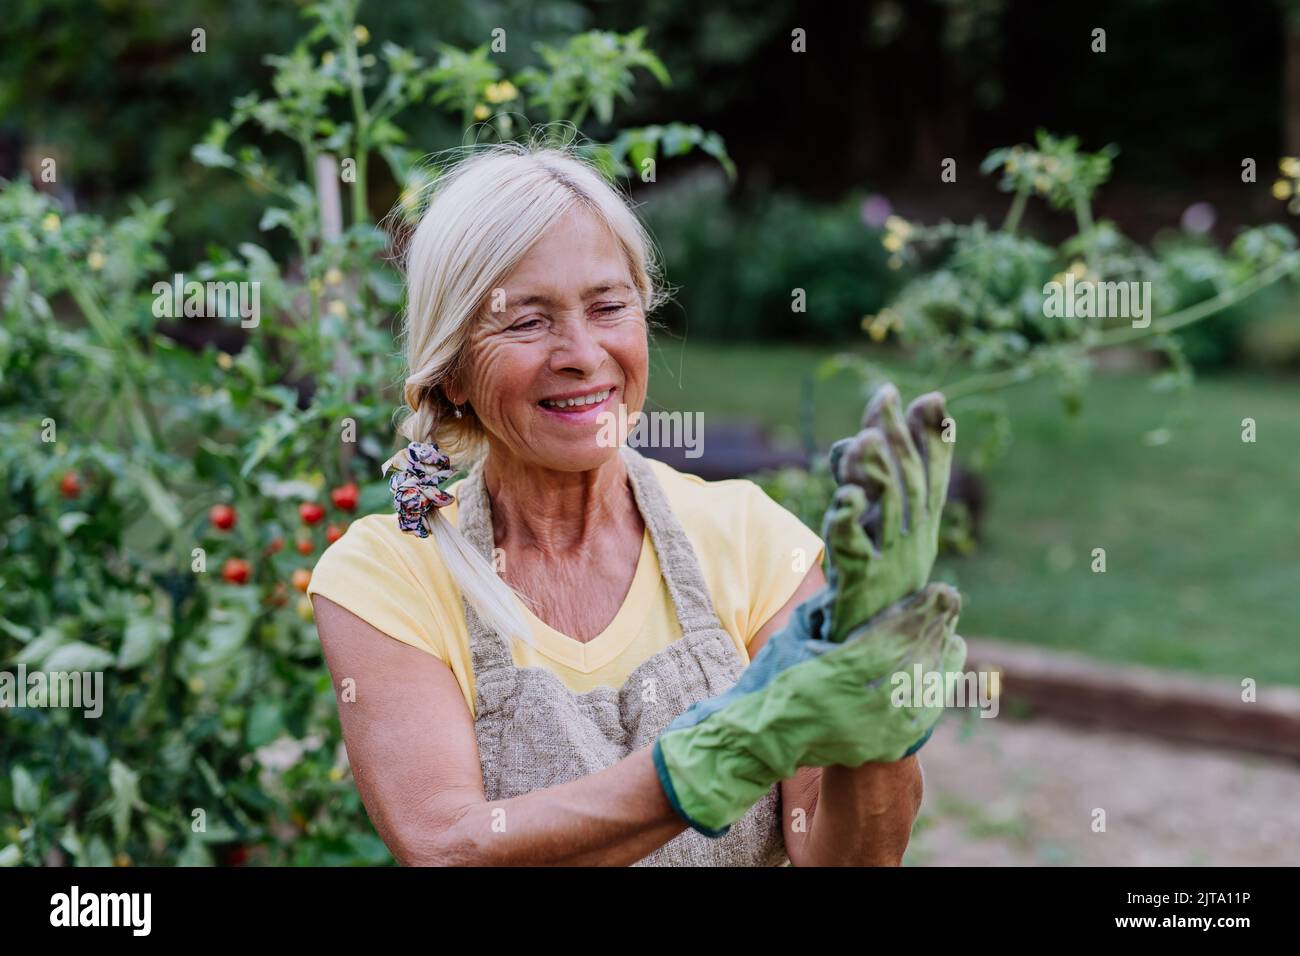 Senior woman puts protective gloves for working in the garden around vegetables Stock Photo